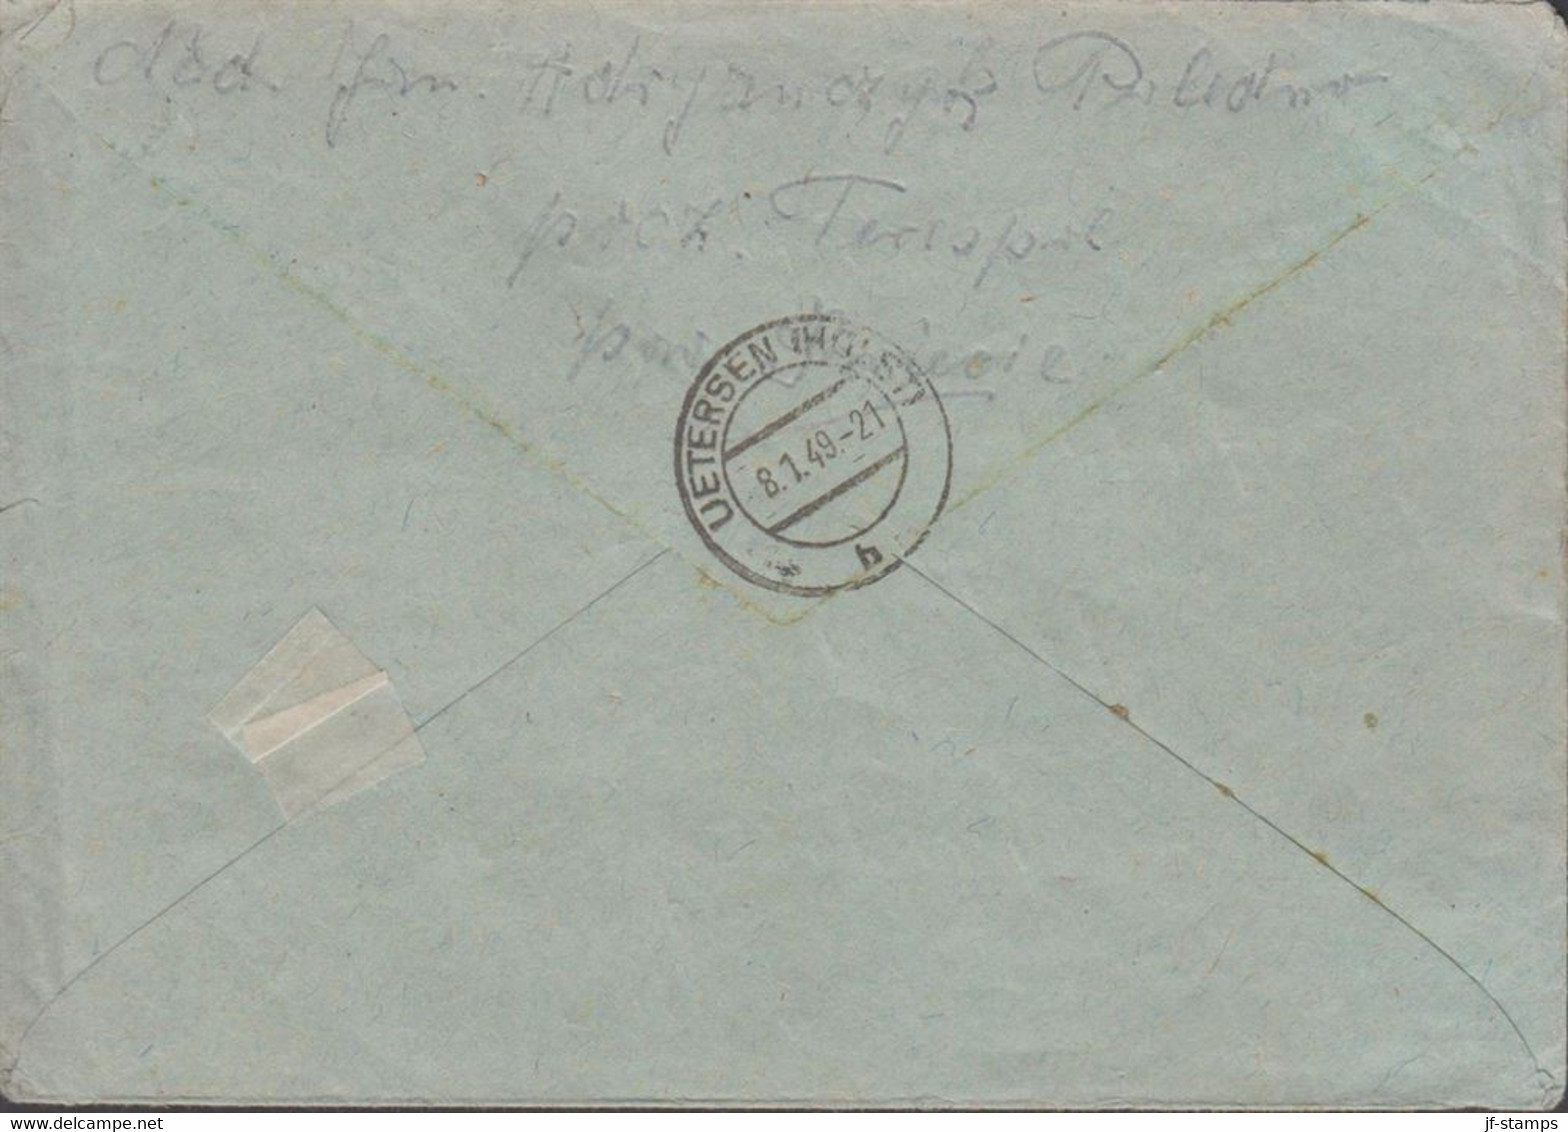 1949. POLSKA.  2 Ex 15 Zl Torun Philately Congres On Cover To Deutschland Cancelled TERESPOL ... (Michel 503) - JF432088 - Government In Exile In London